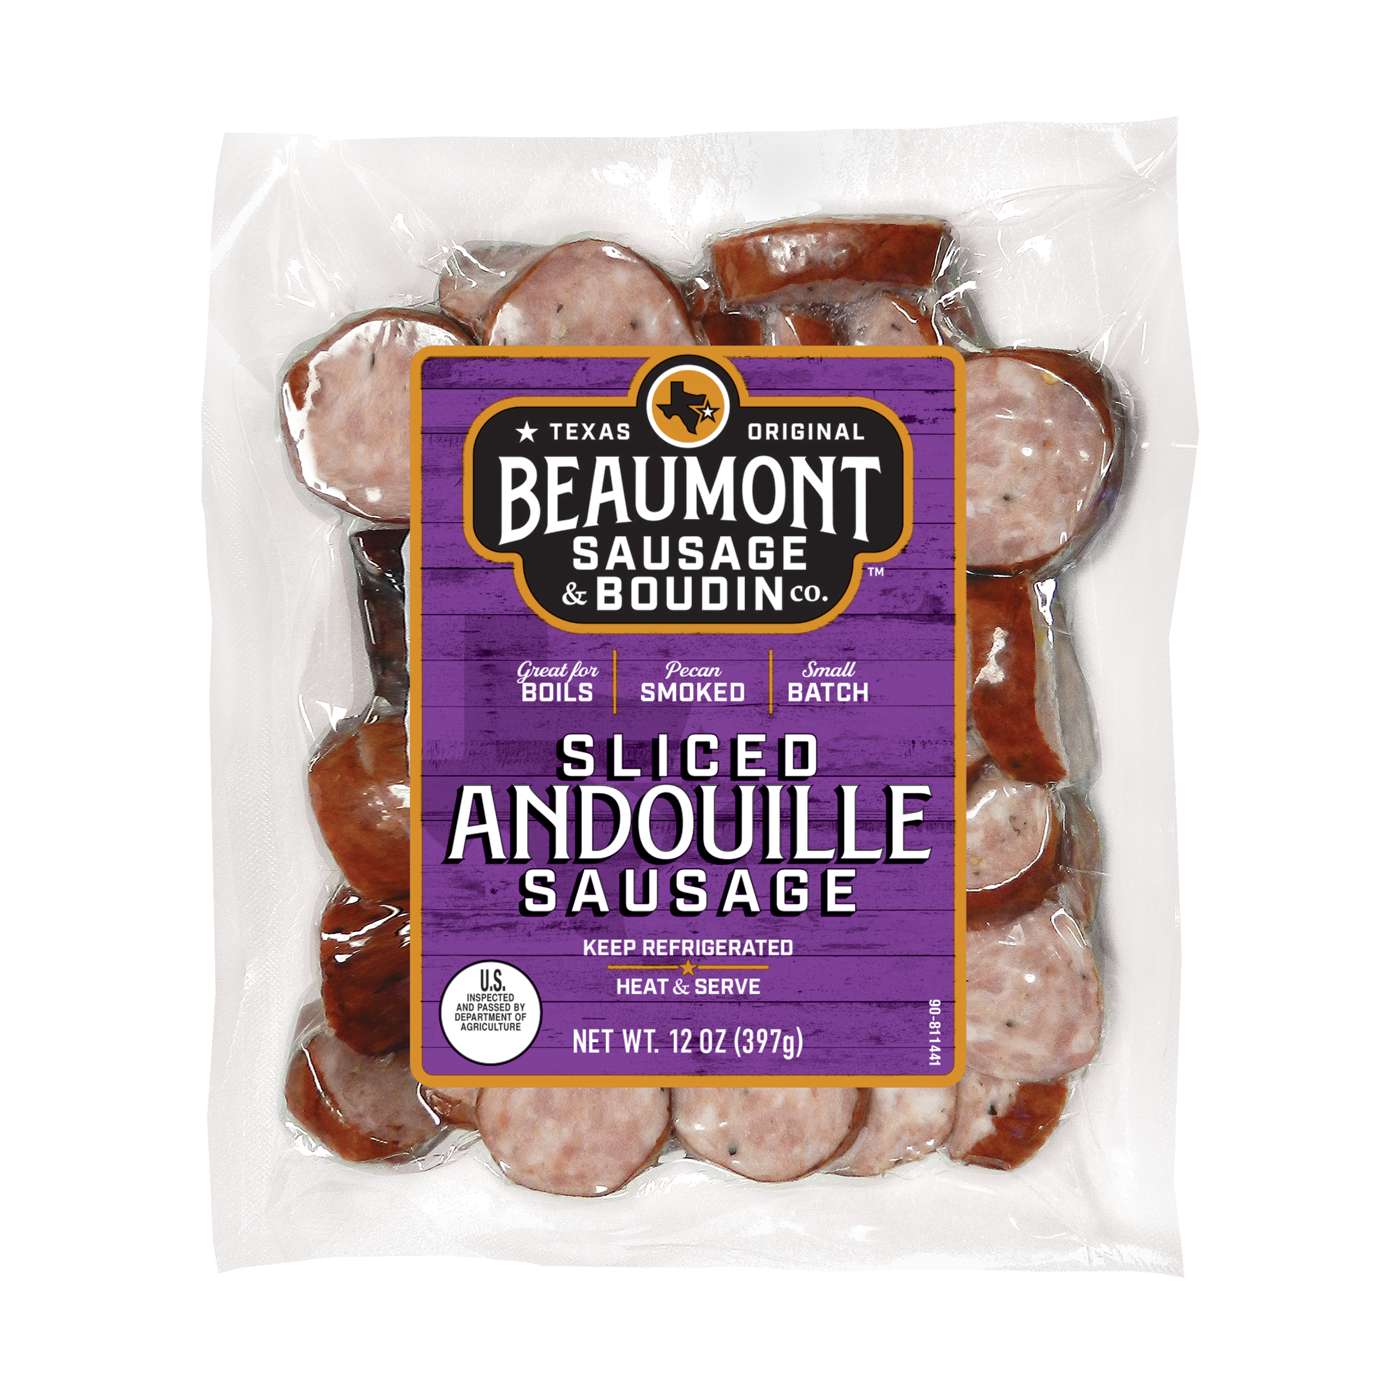 Beaumont Sausage & Boudin Co. Sliced Andouille Sausage; image 1 of 2